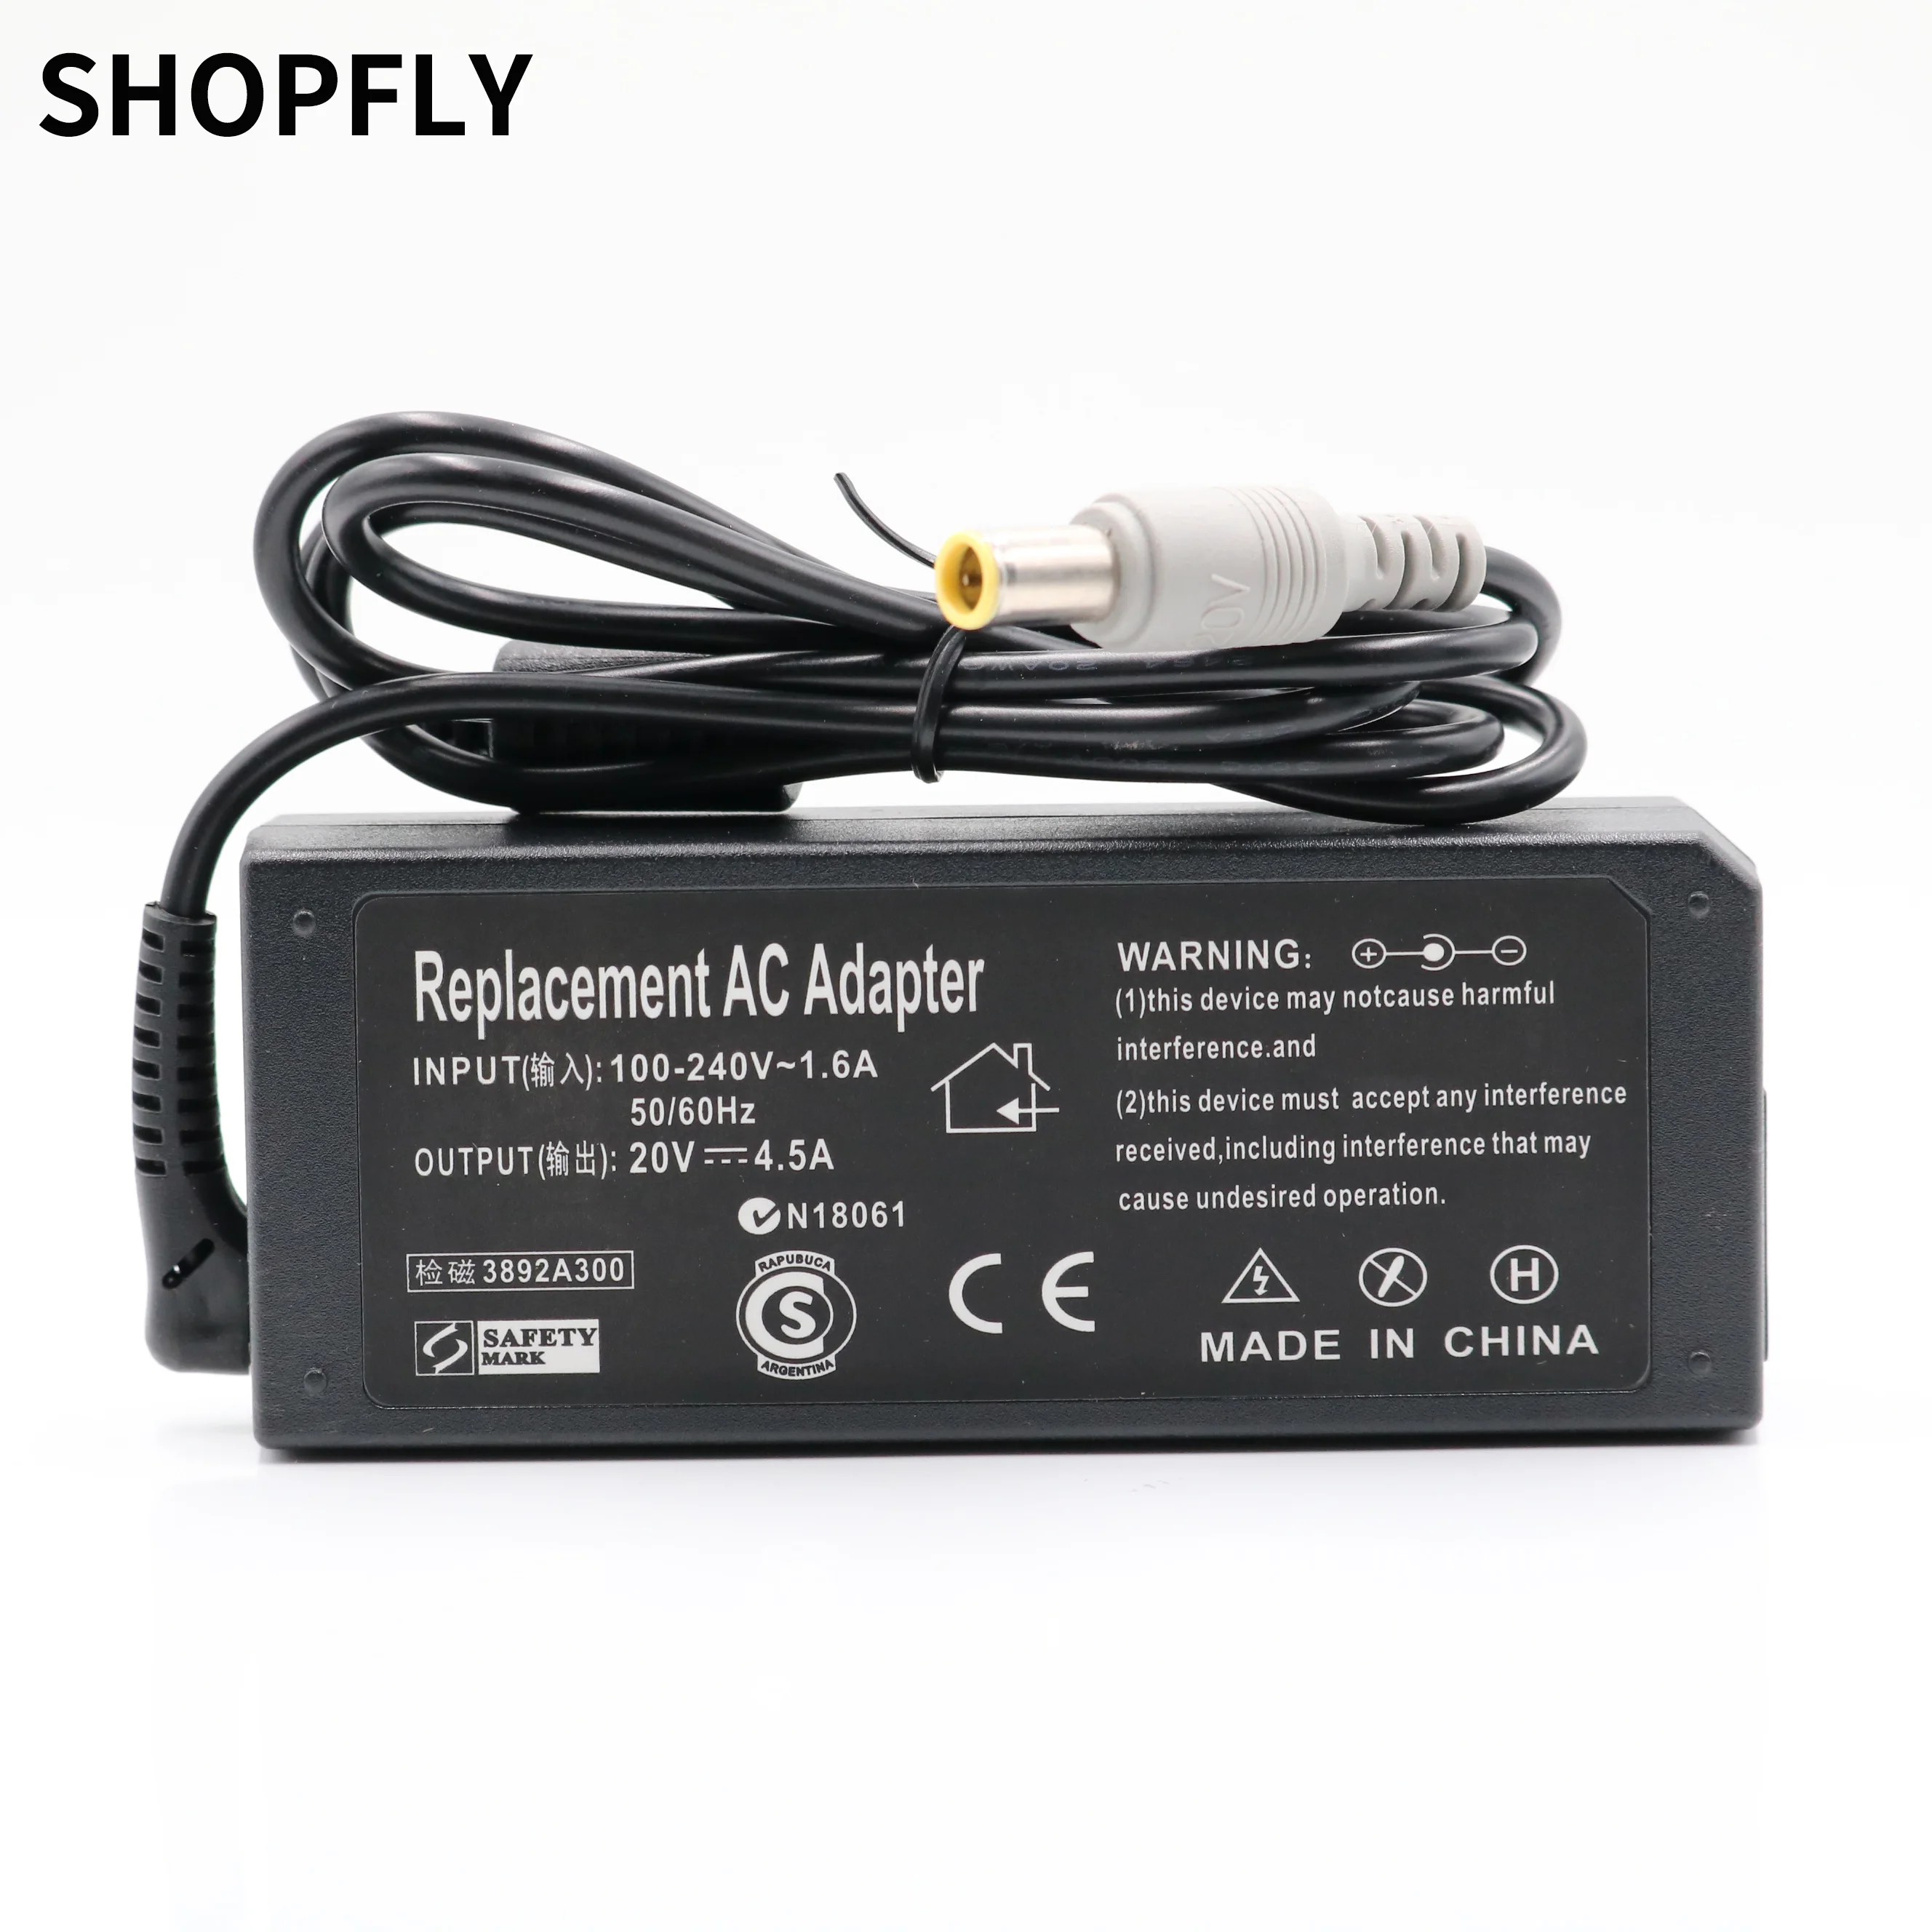 

20V 4.5A 90W Laptop Ac Adapter Charger for Lenovo / Thinkpad T400 T410 T420 T430 T500 T510 T520 T530 T400s T410s T410i